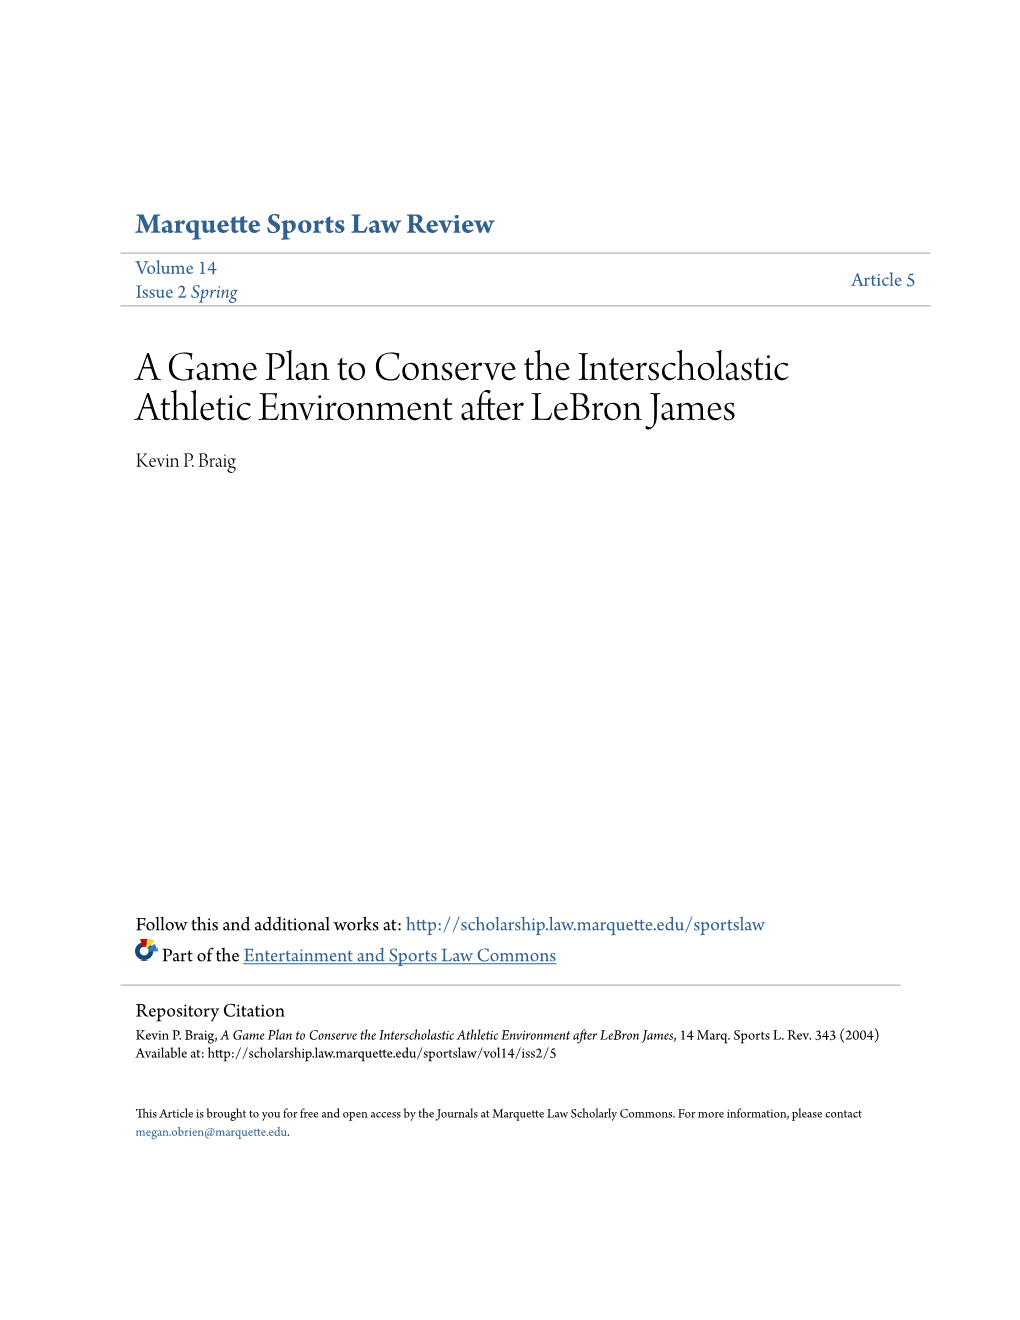 A Game Plan to Conserve the Interscholastic Athletic Environment After Lebron James Kevin P